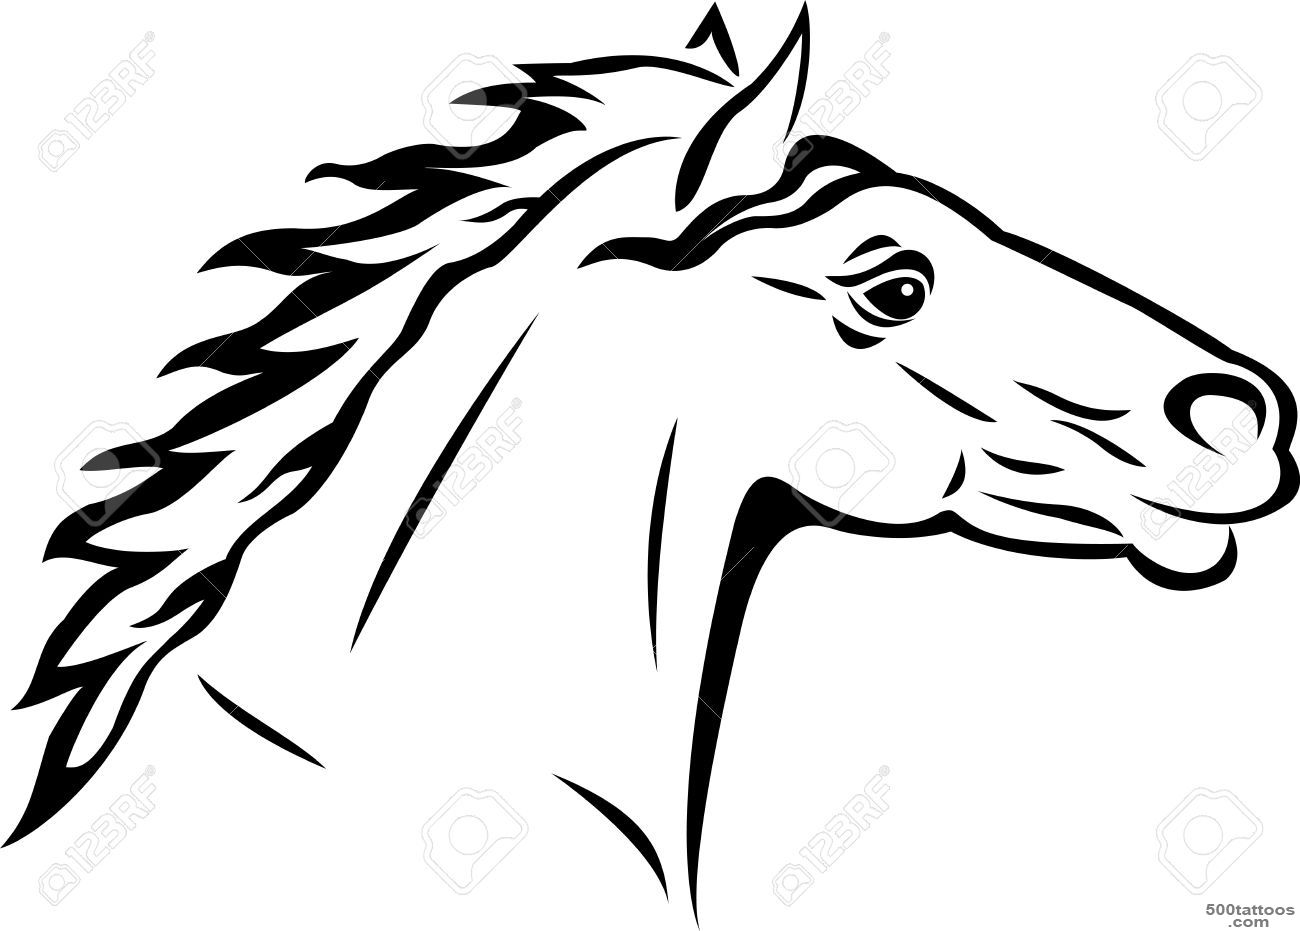 Horse Tattoo Royalty Free Cliparts, Vectors, And Stock ..._43